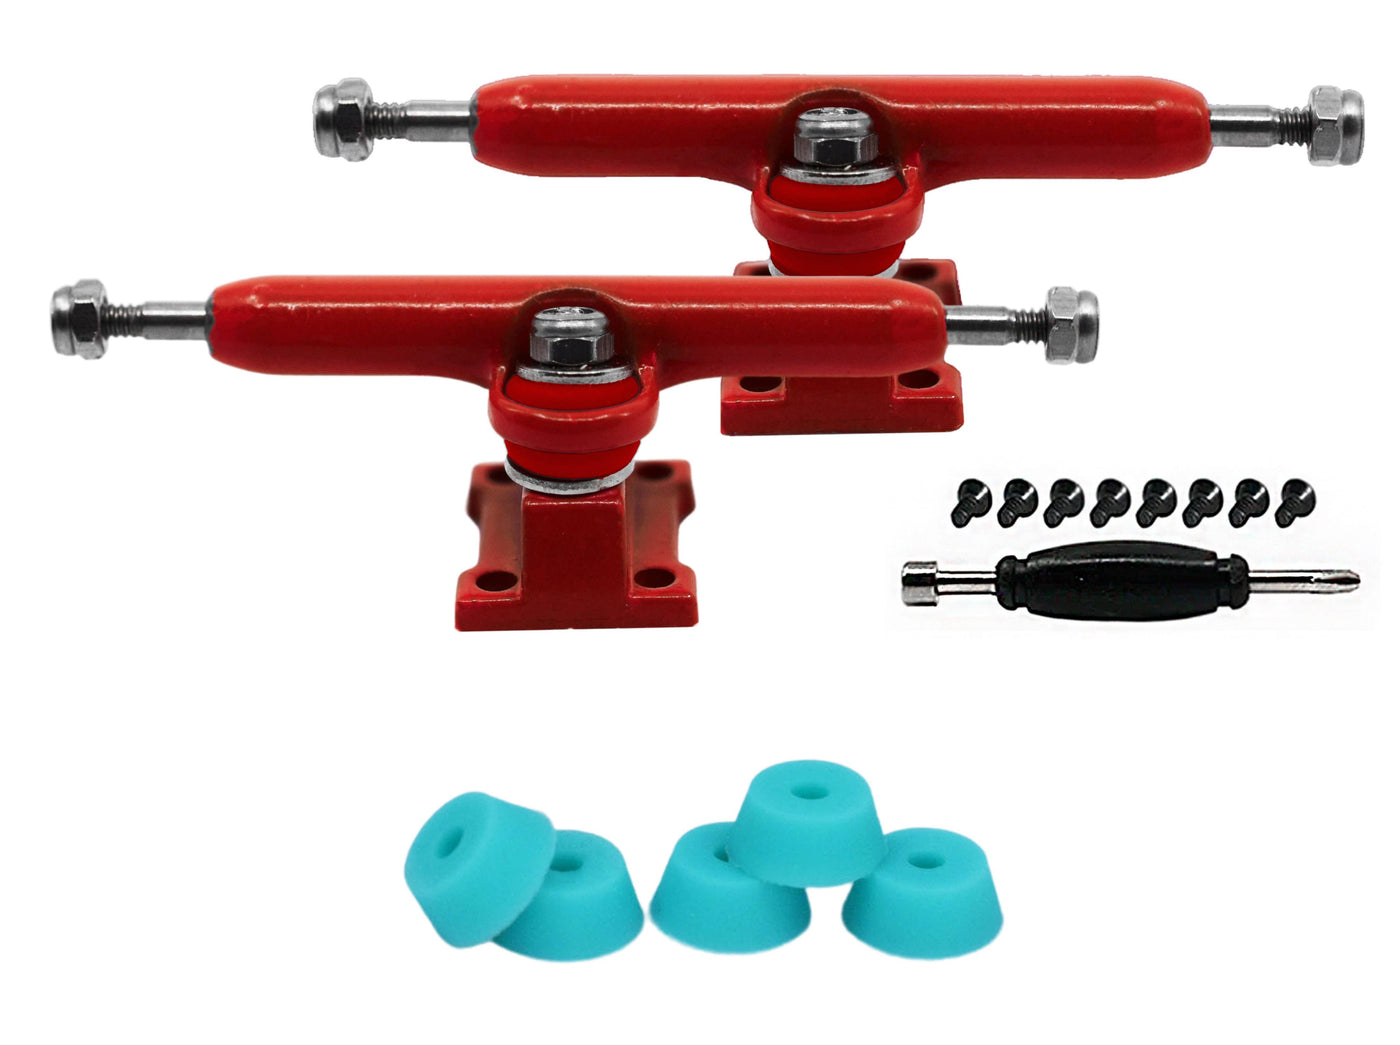 Teak Tuning Fingerboard Prodigy Trucks with Upgraded Tuning, Red - 34mm Width Red